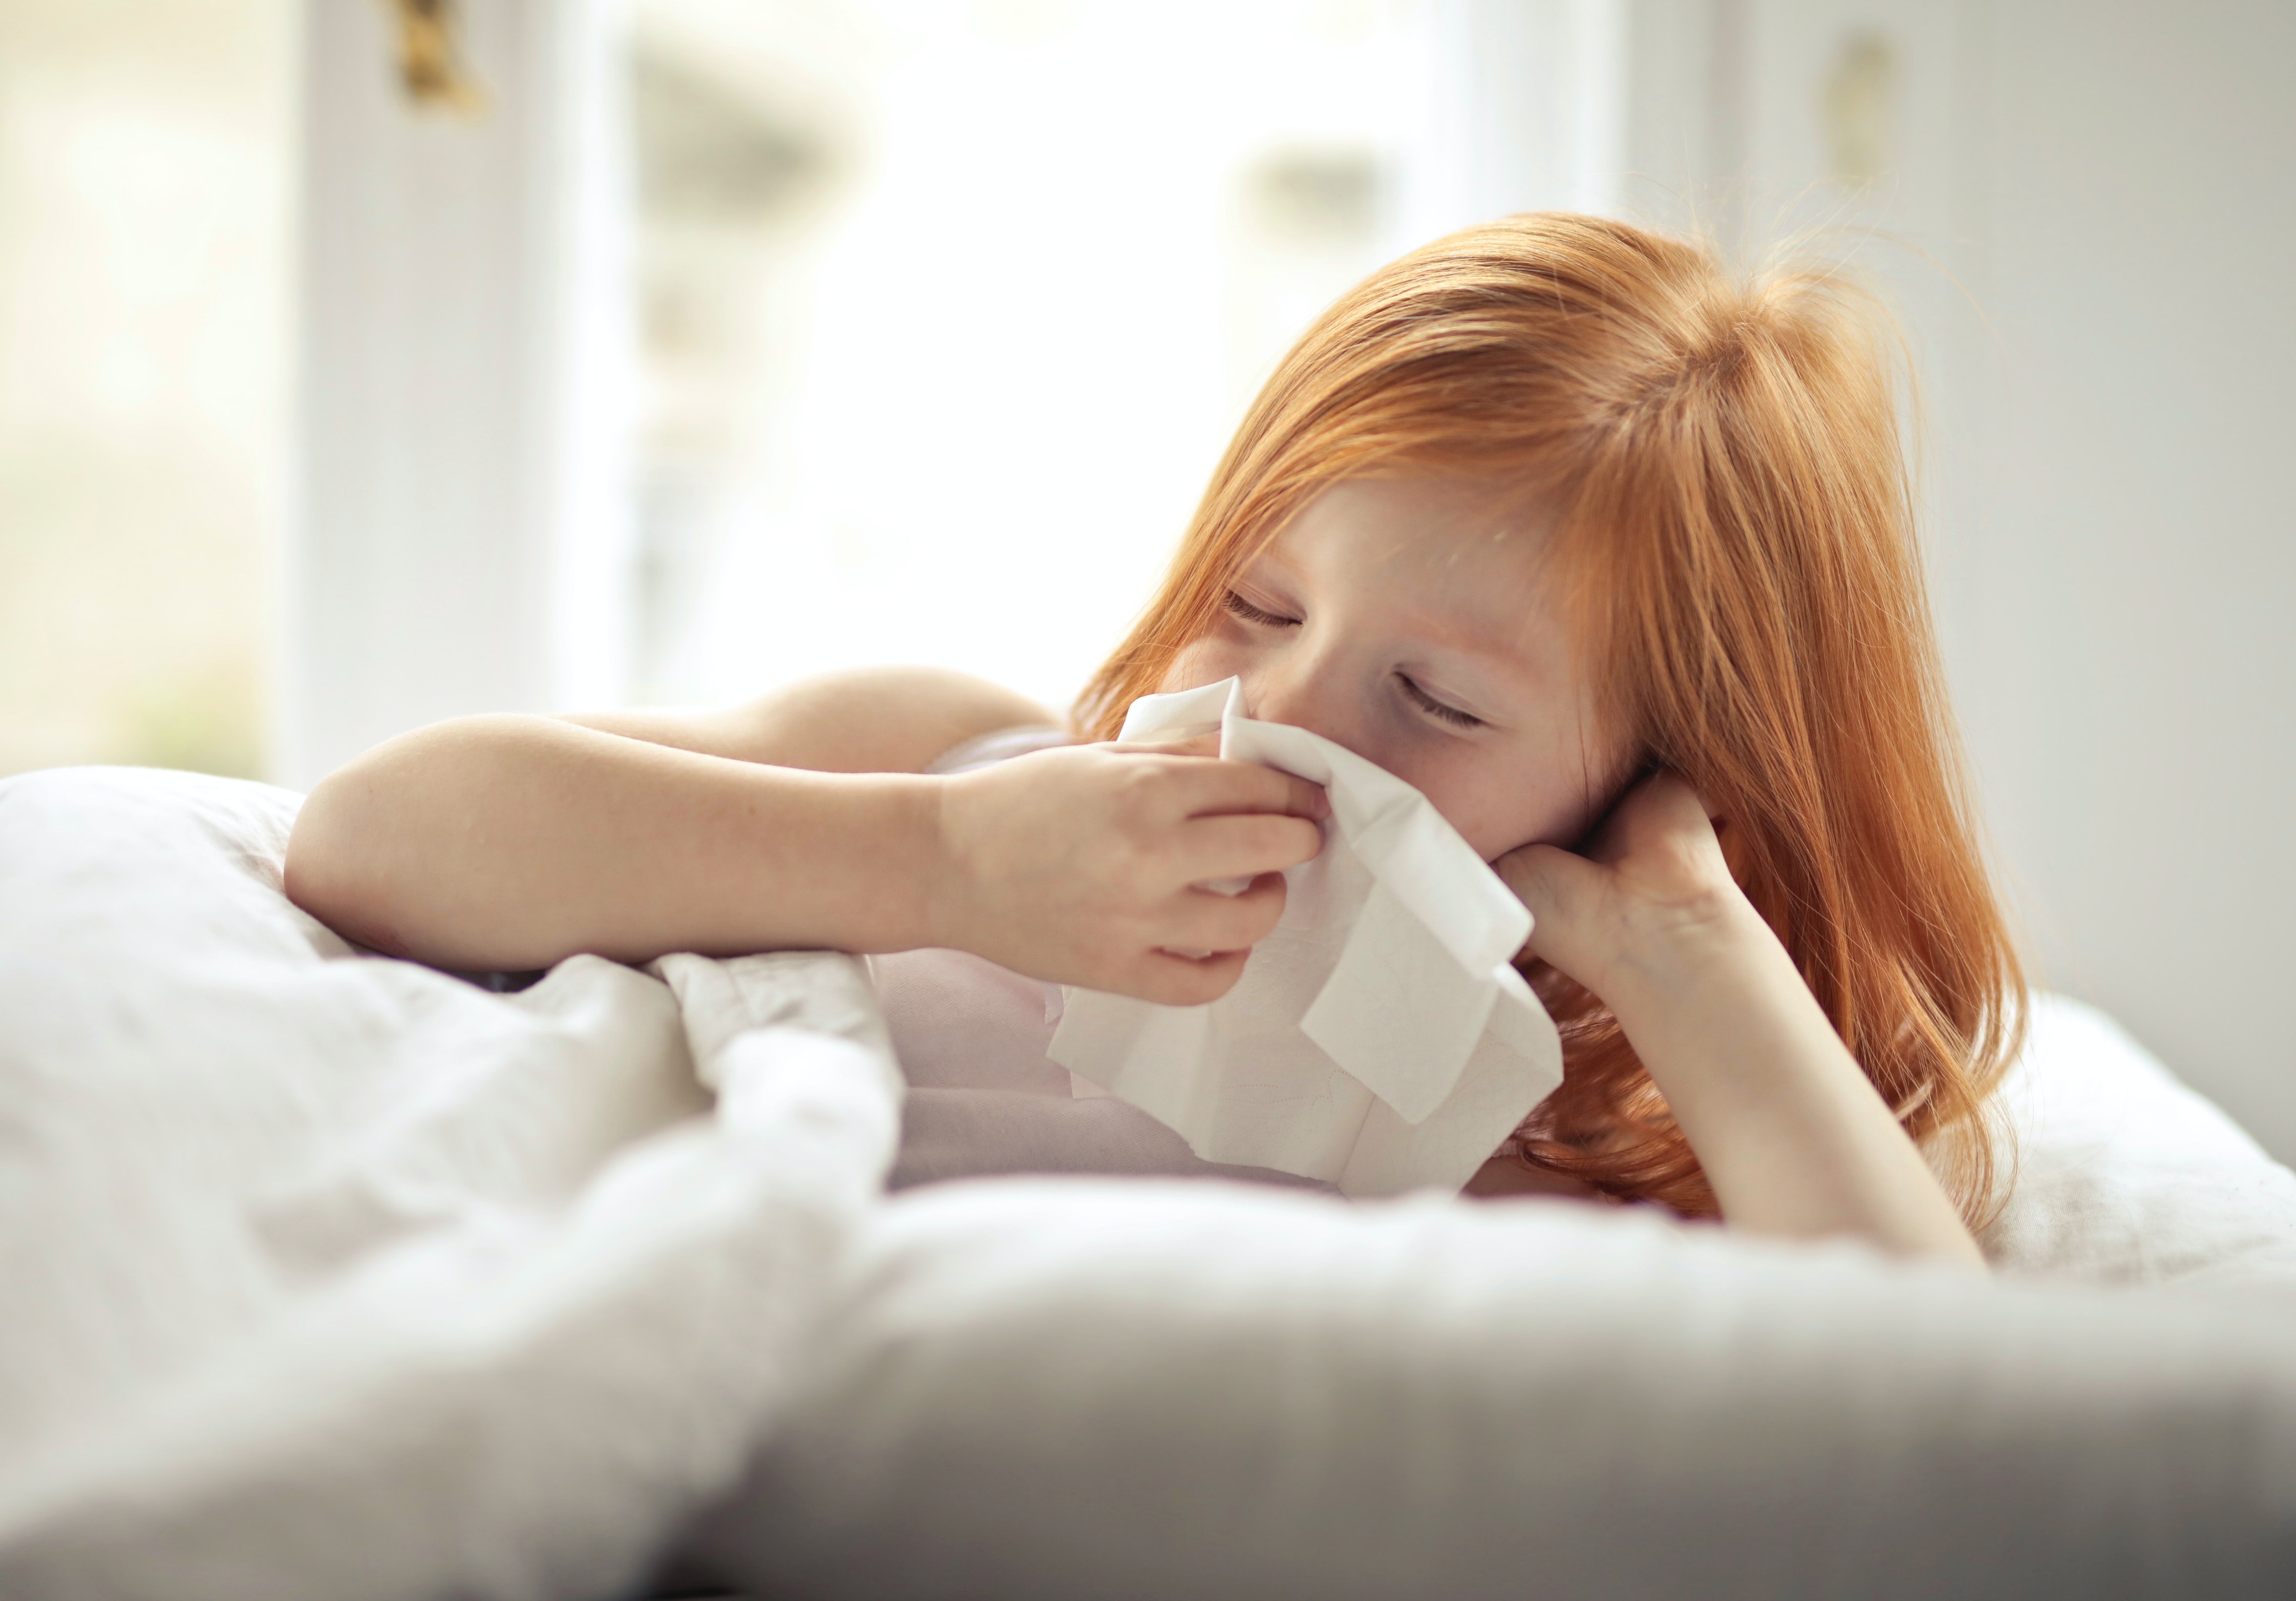 Special Things to Do for Your Children When They Sick